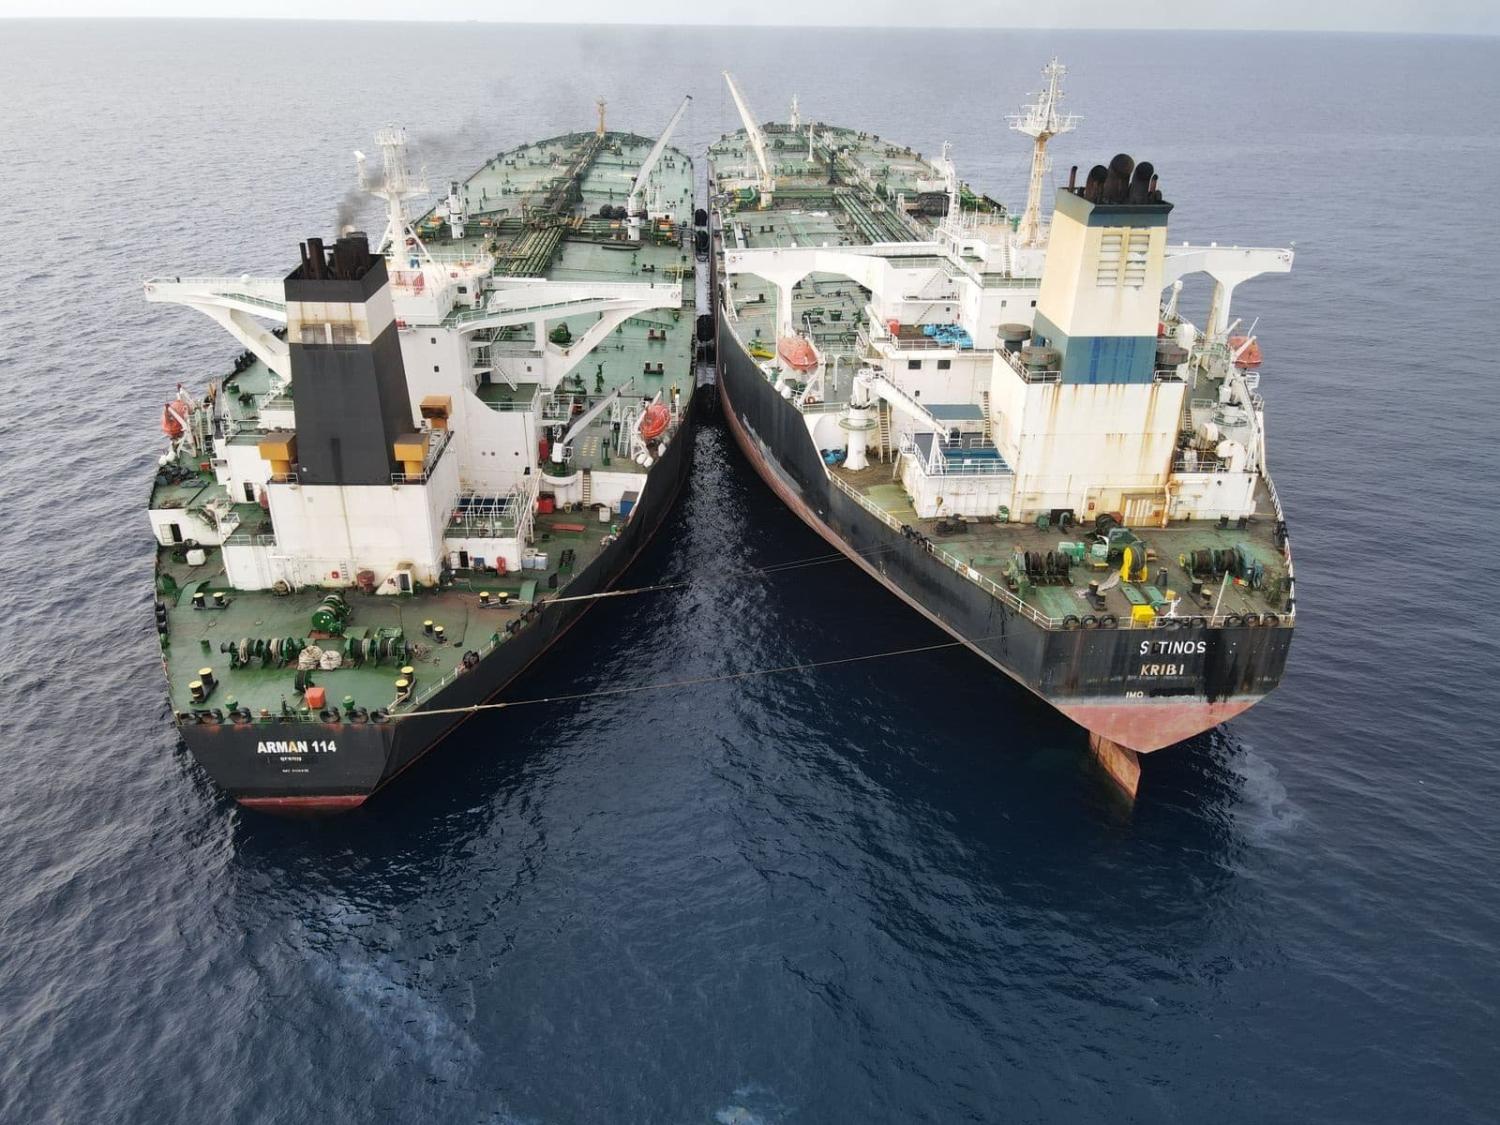 Iranian-flagged Arman 114 and Cameroon-flagged S Tinos carry out an allegedly illegal ship-to-ship transfer in Indonesia's North Natuna Sea on 11 July 2023 (Indonesian Maritime Security Agency/Anadolu Agency via Getty Image)